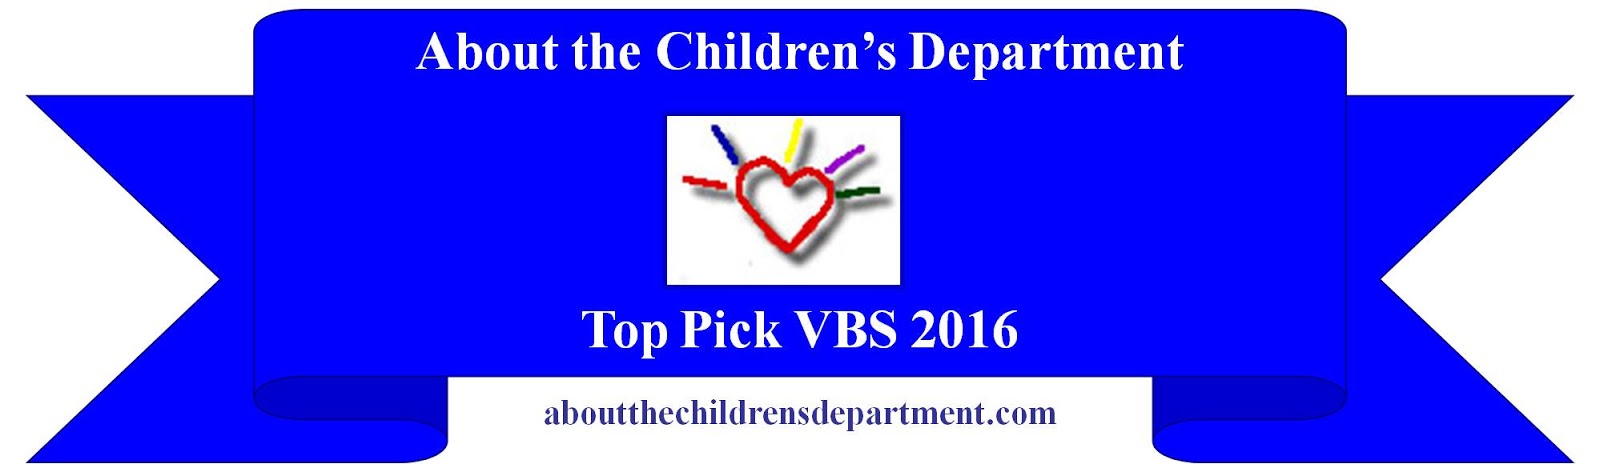 About The Children S Department Vbs 2016 Top Pick Deep Sea Discovery From Christian Standard Media Formerly Standard Publishing